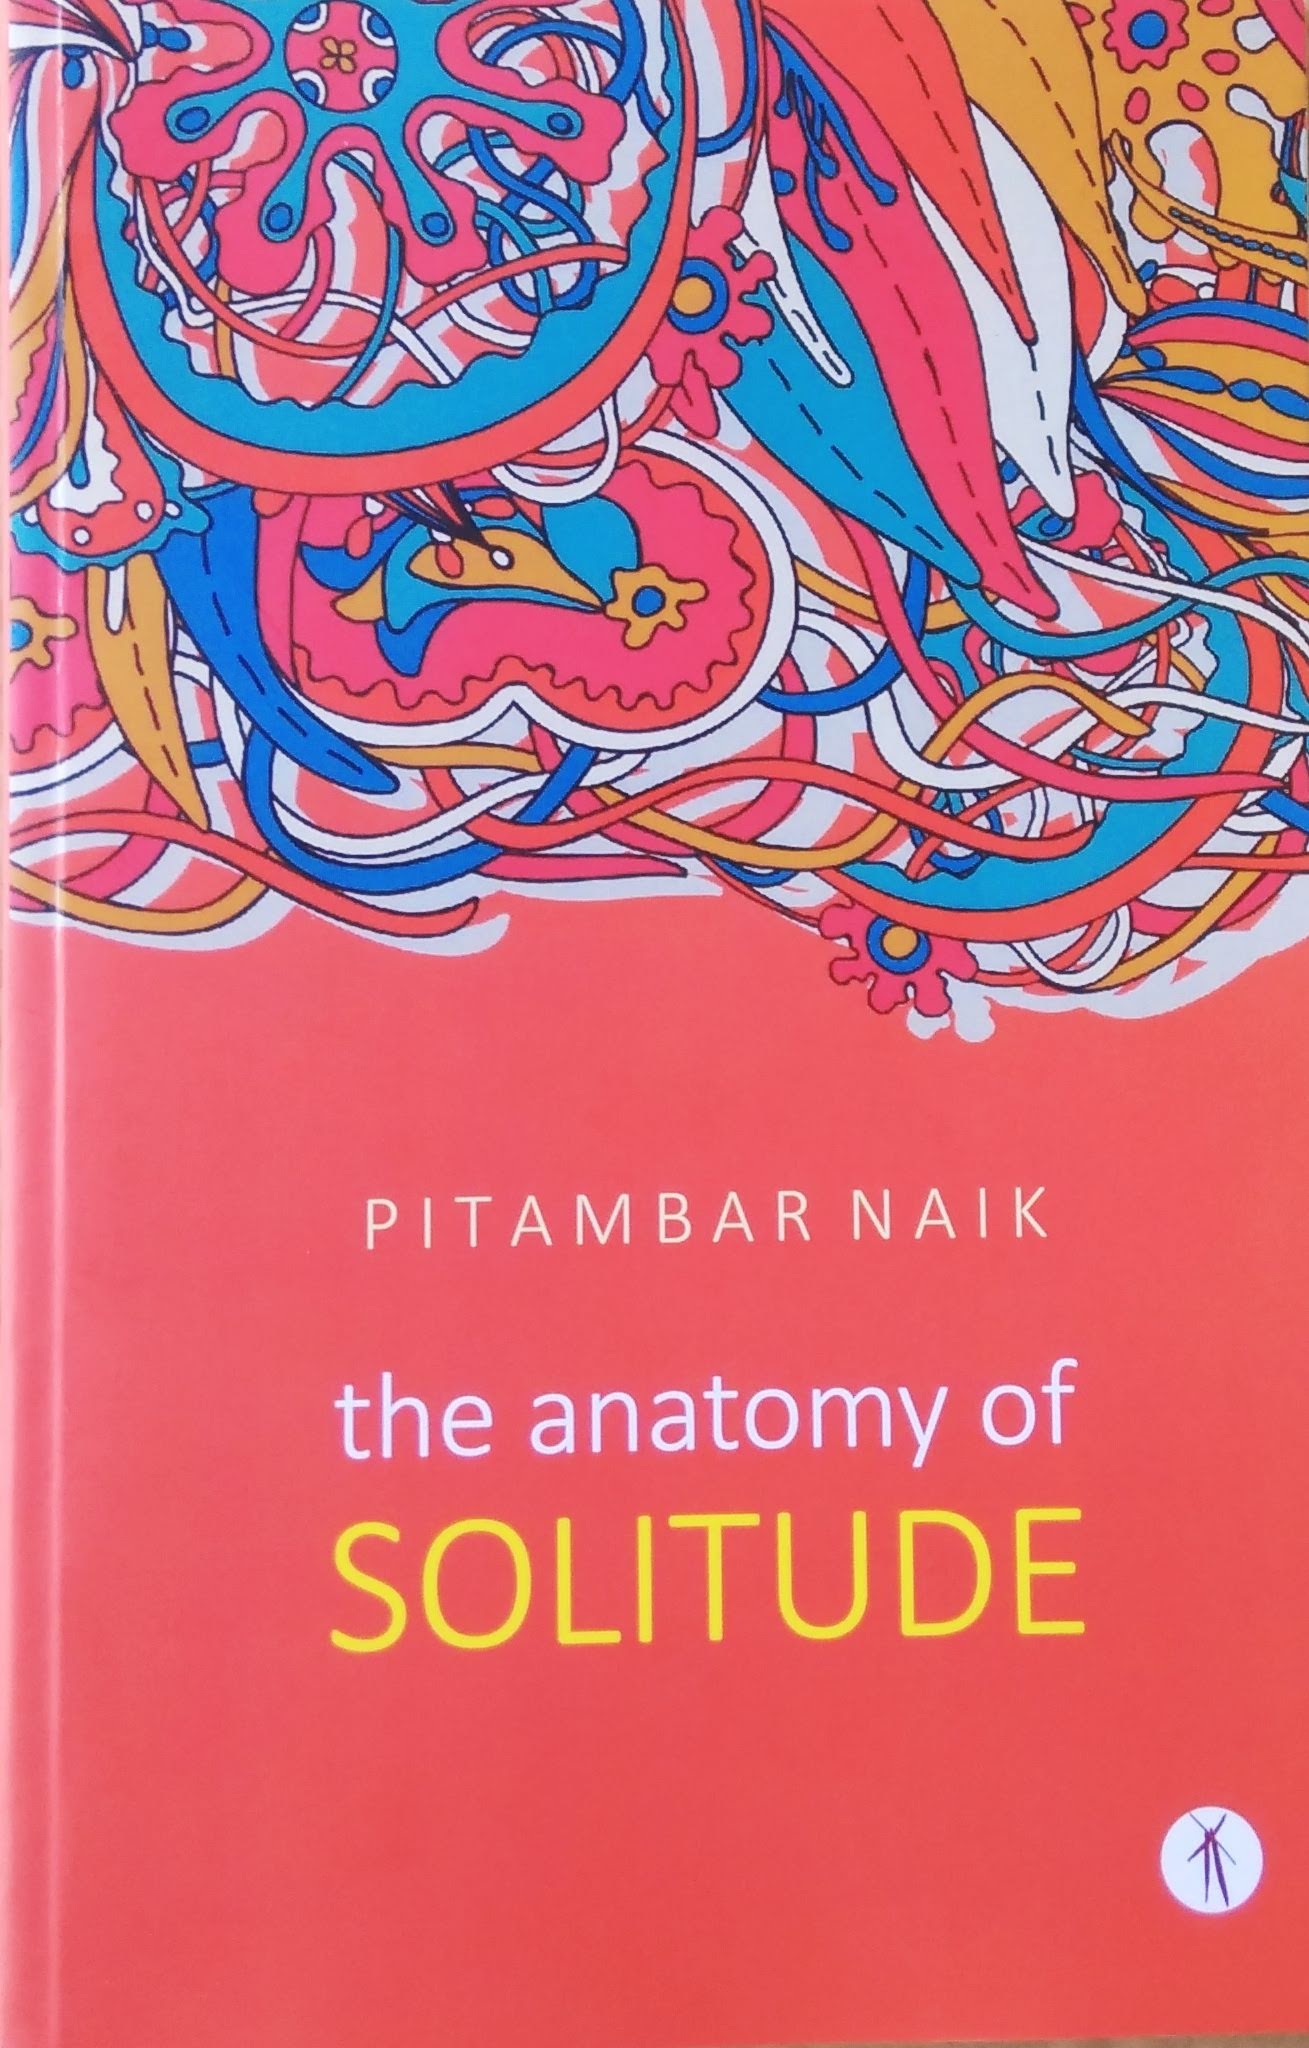 Book Review - The Anatomy of Solitude